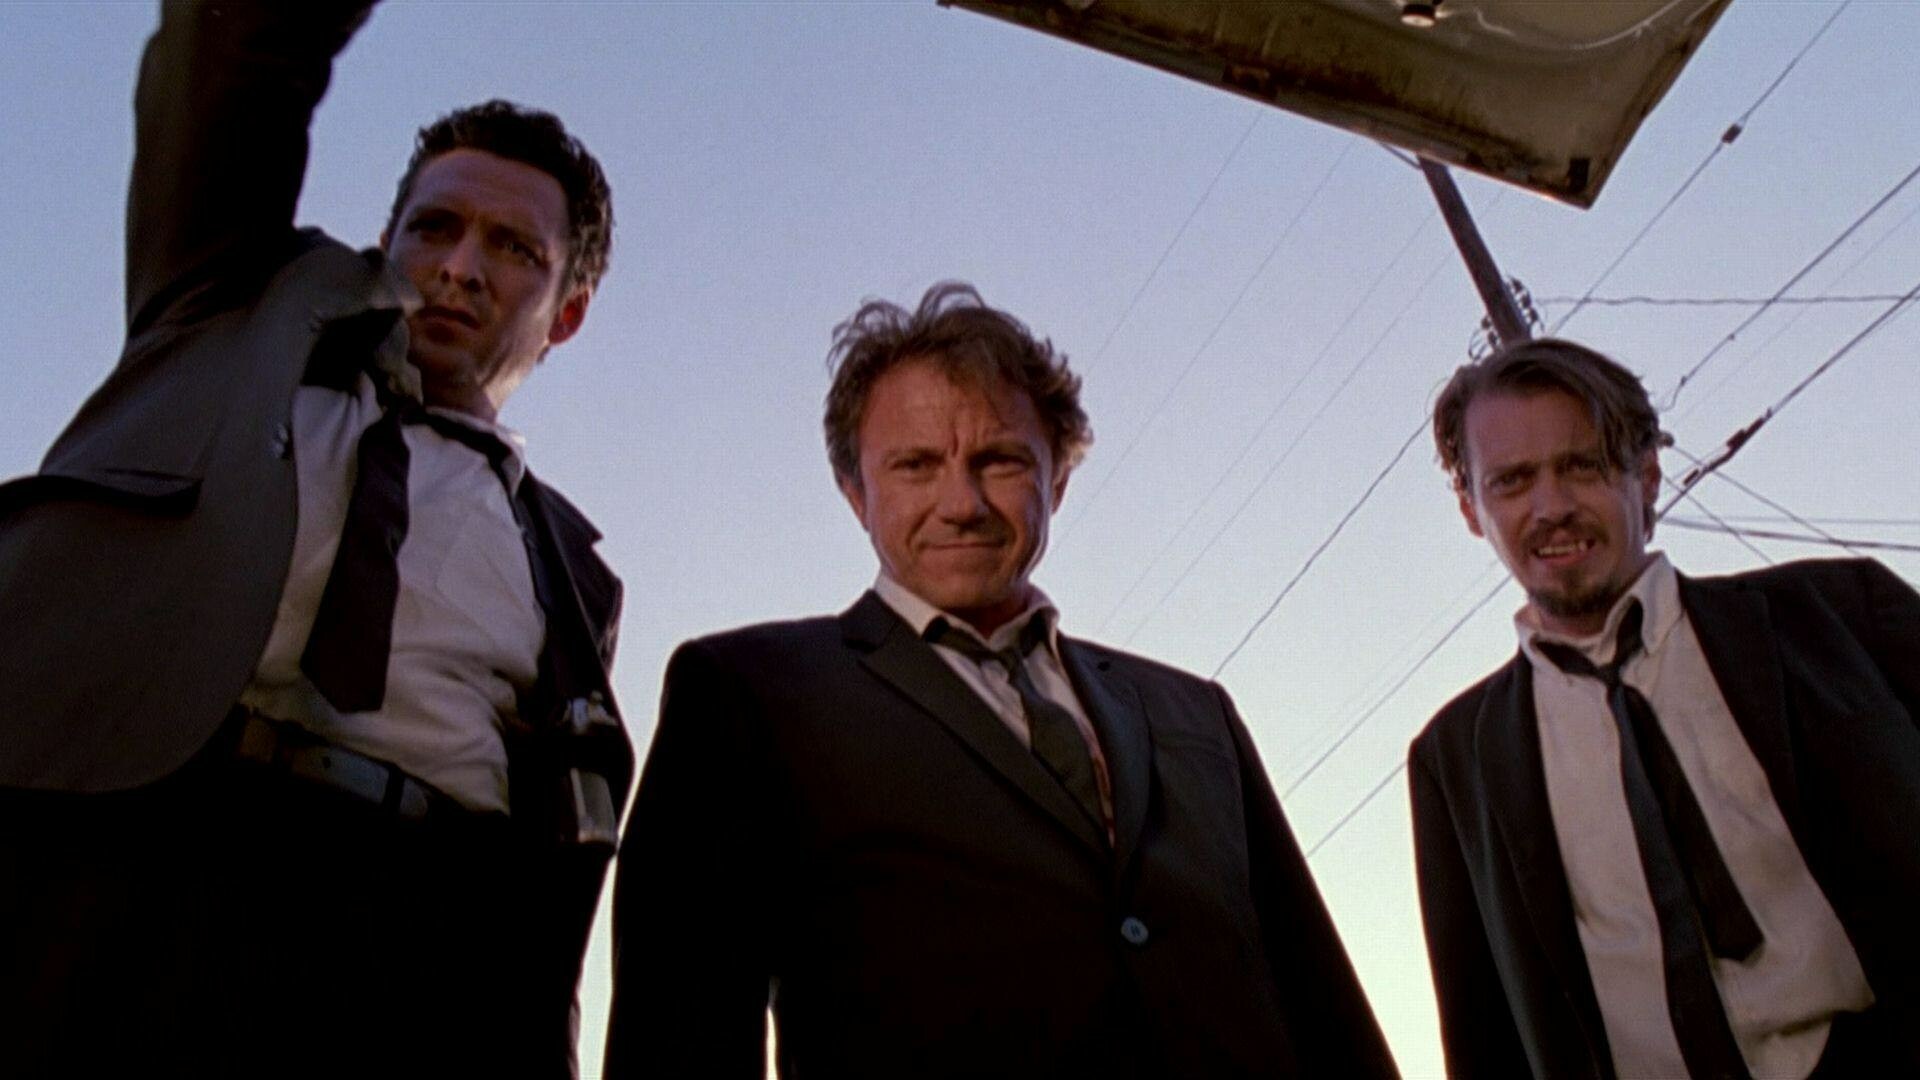 Reservoir Dogs: Trunk scene, Diamond thieves whose heist of a jewelry store goes terribly wrong. 1920x1080 Full HD Background.